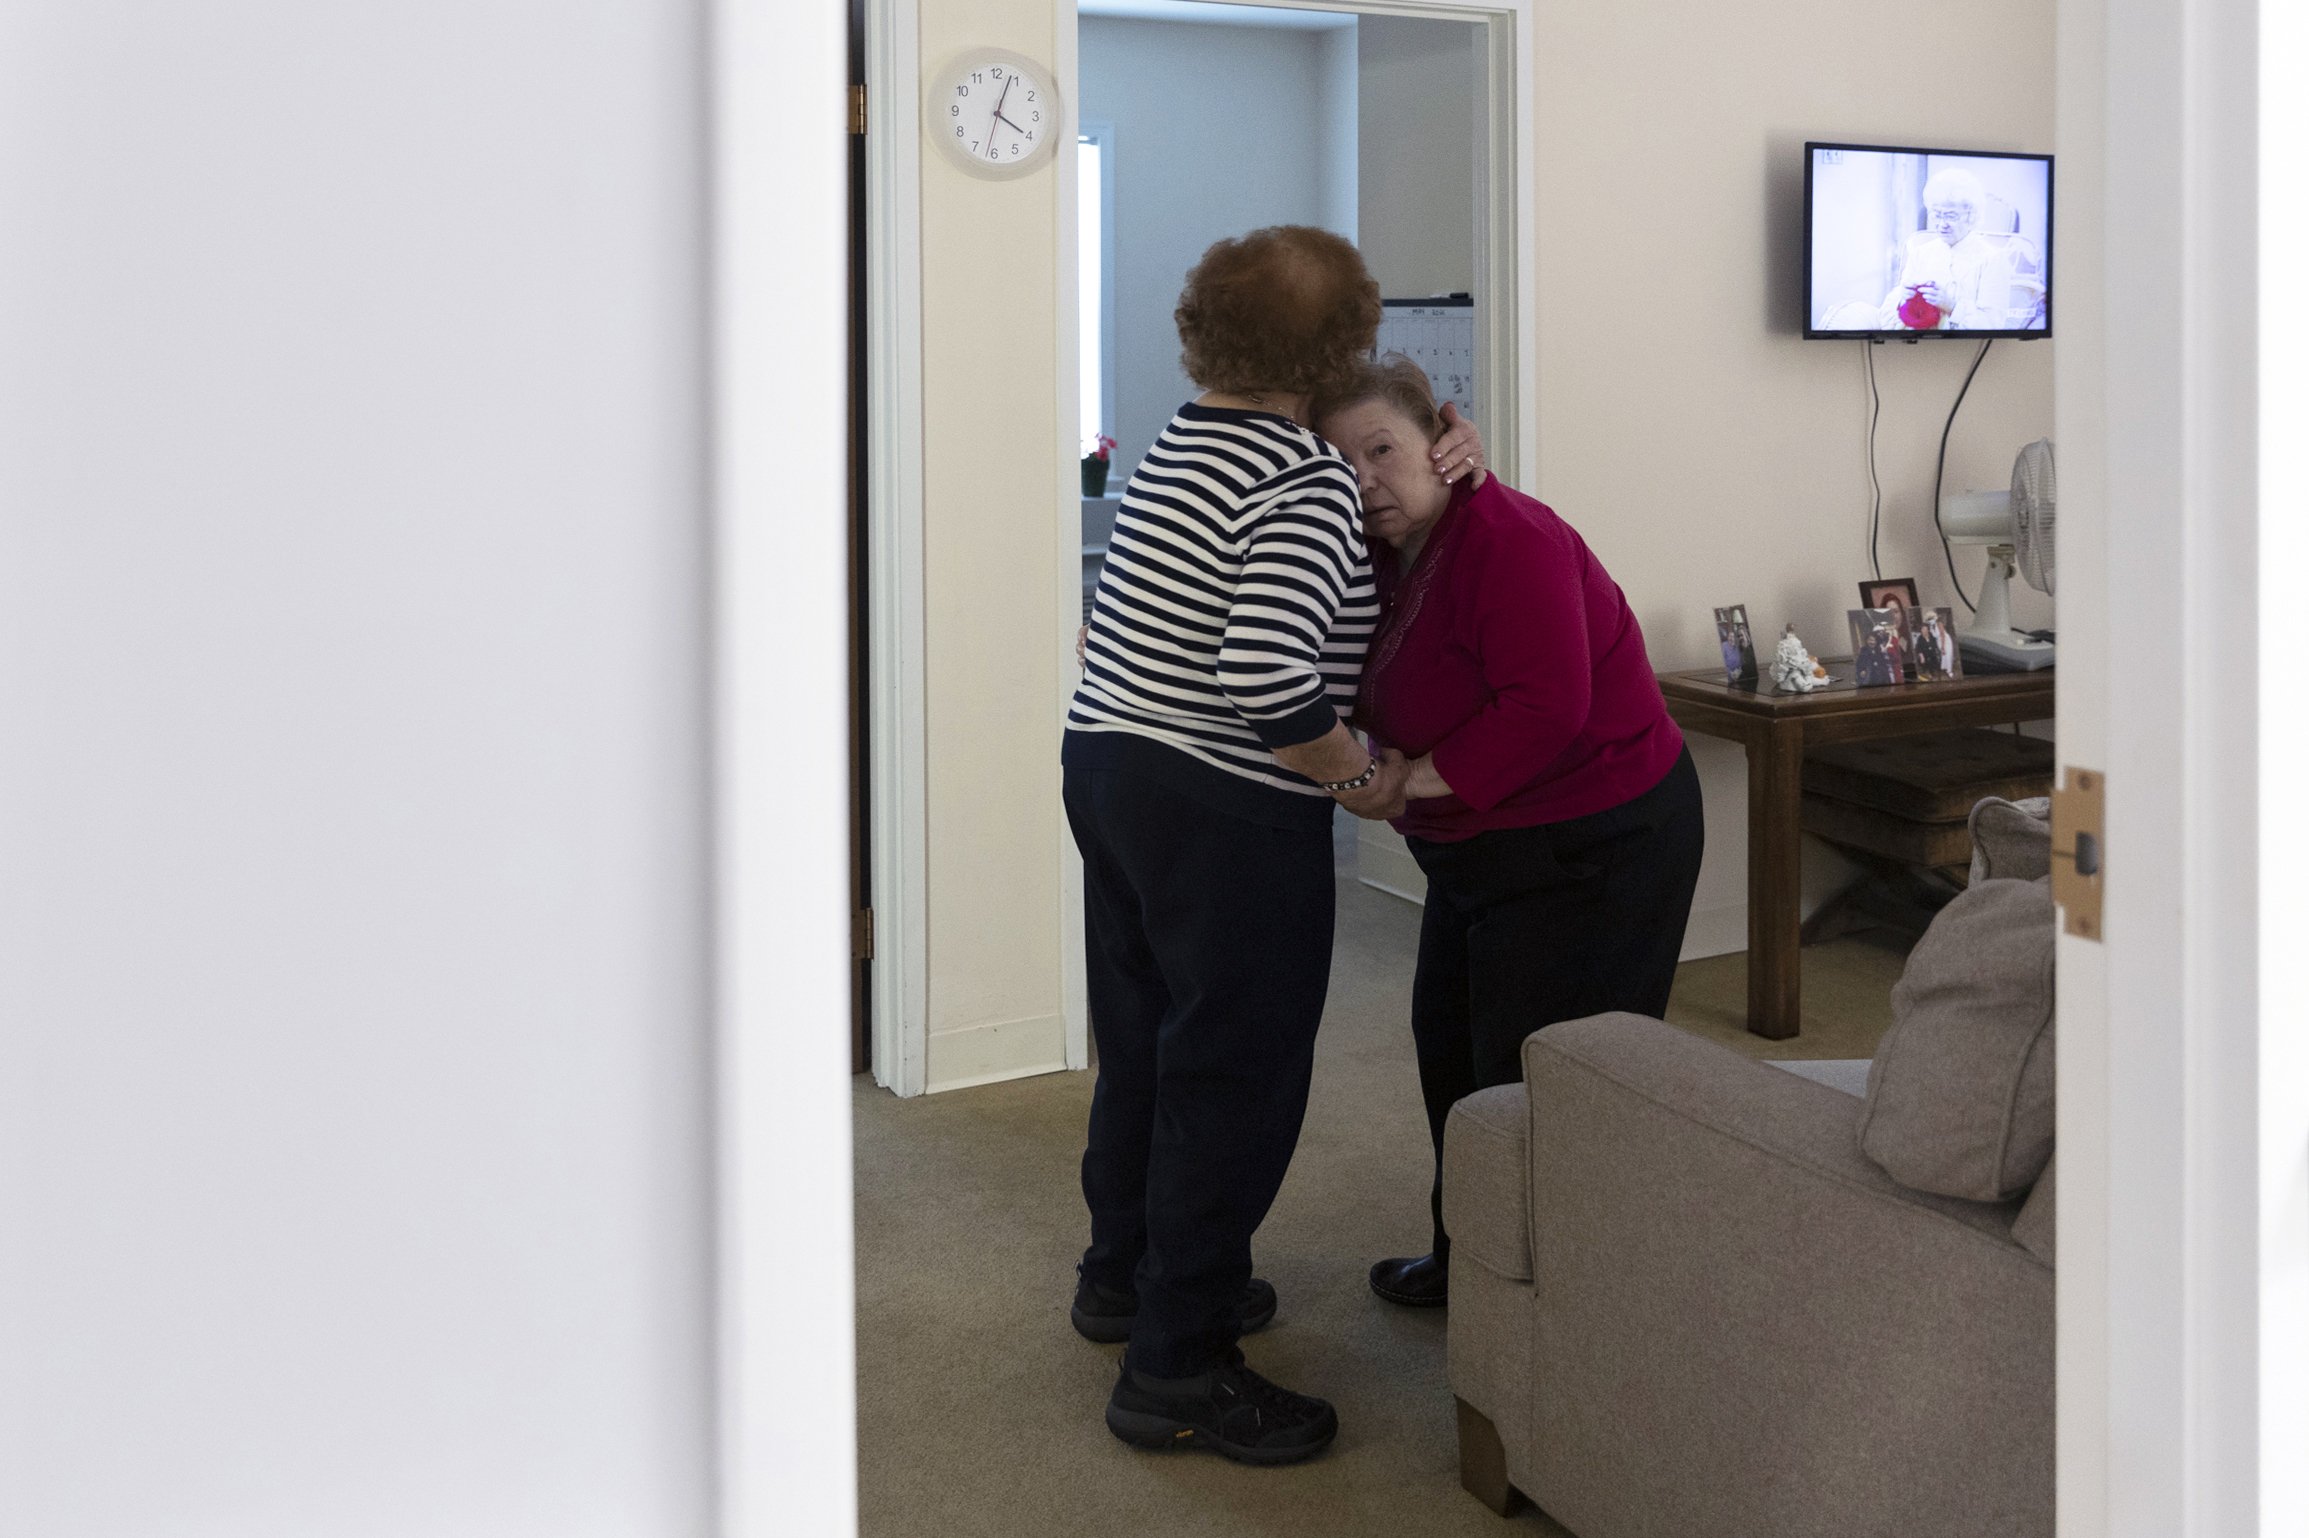   Pauline (left) comforts MaryAnn on May 23, 2021. MaryAnn’s dementia has been greatly worsened due to the social isolation necessitated by the pandemic.  